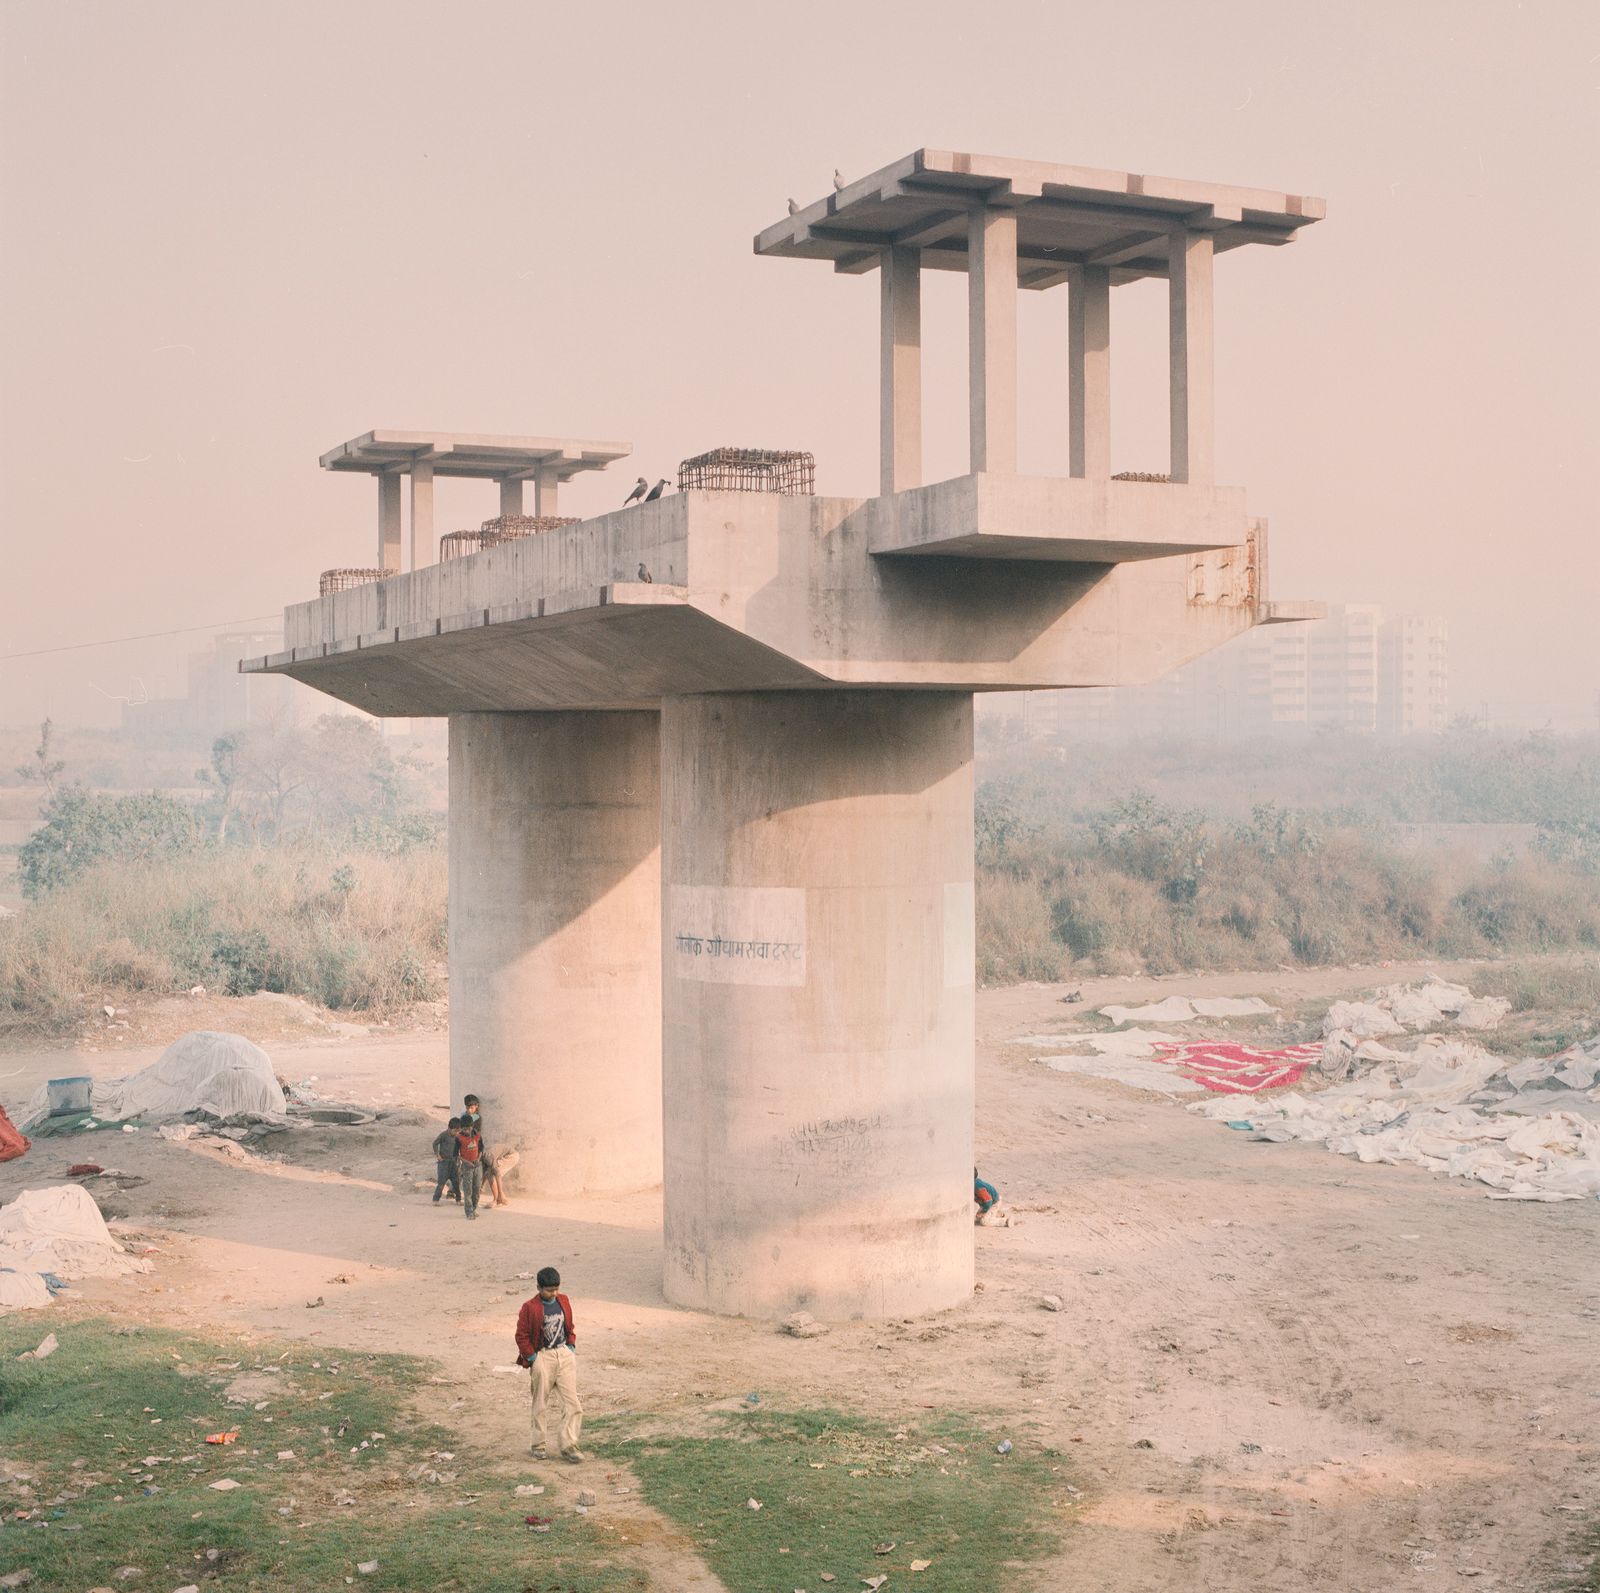 © Giulio Di Sturco - an outdoor makshift laundry for hotels along the Yamuna river,